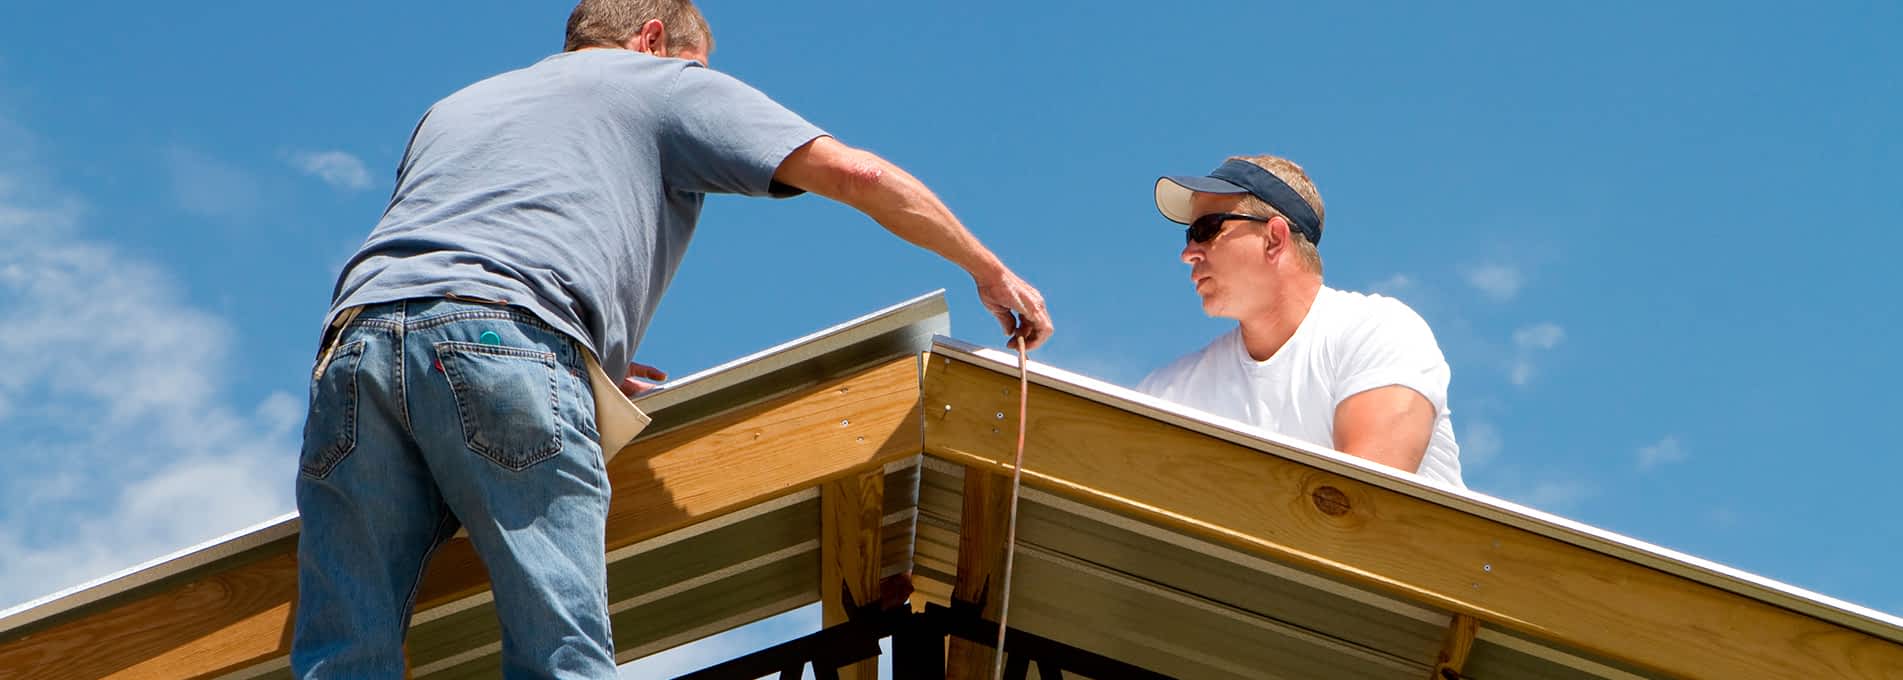 The Best Roofing Contractor in Flagstaff AZ: How to Select One